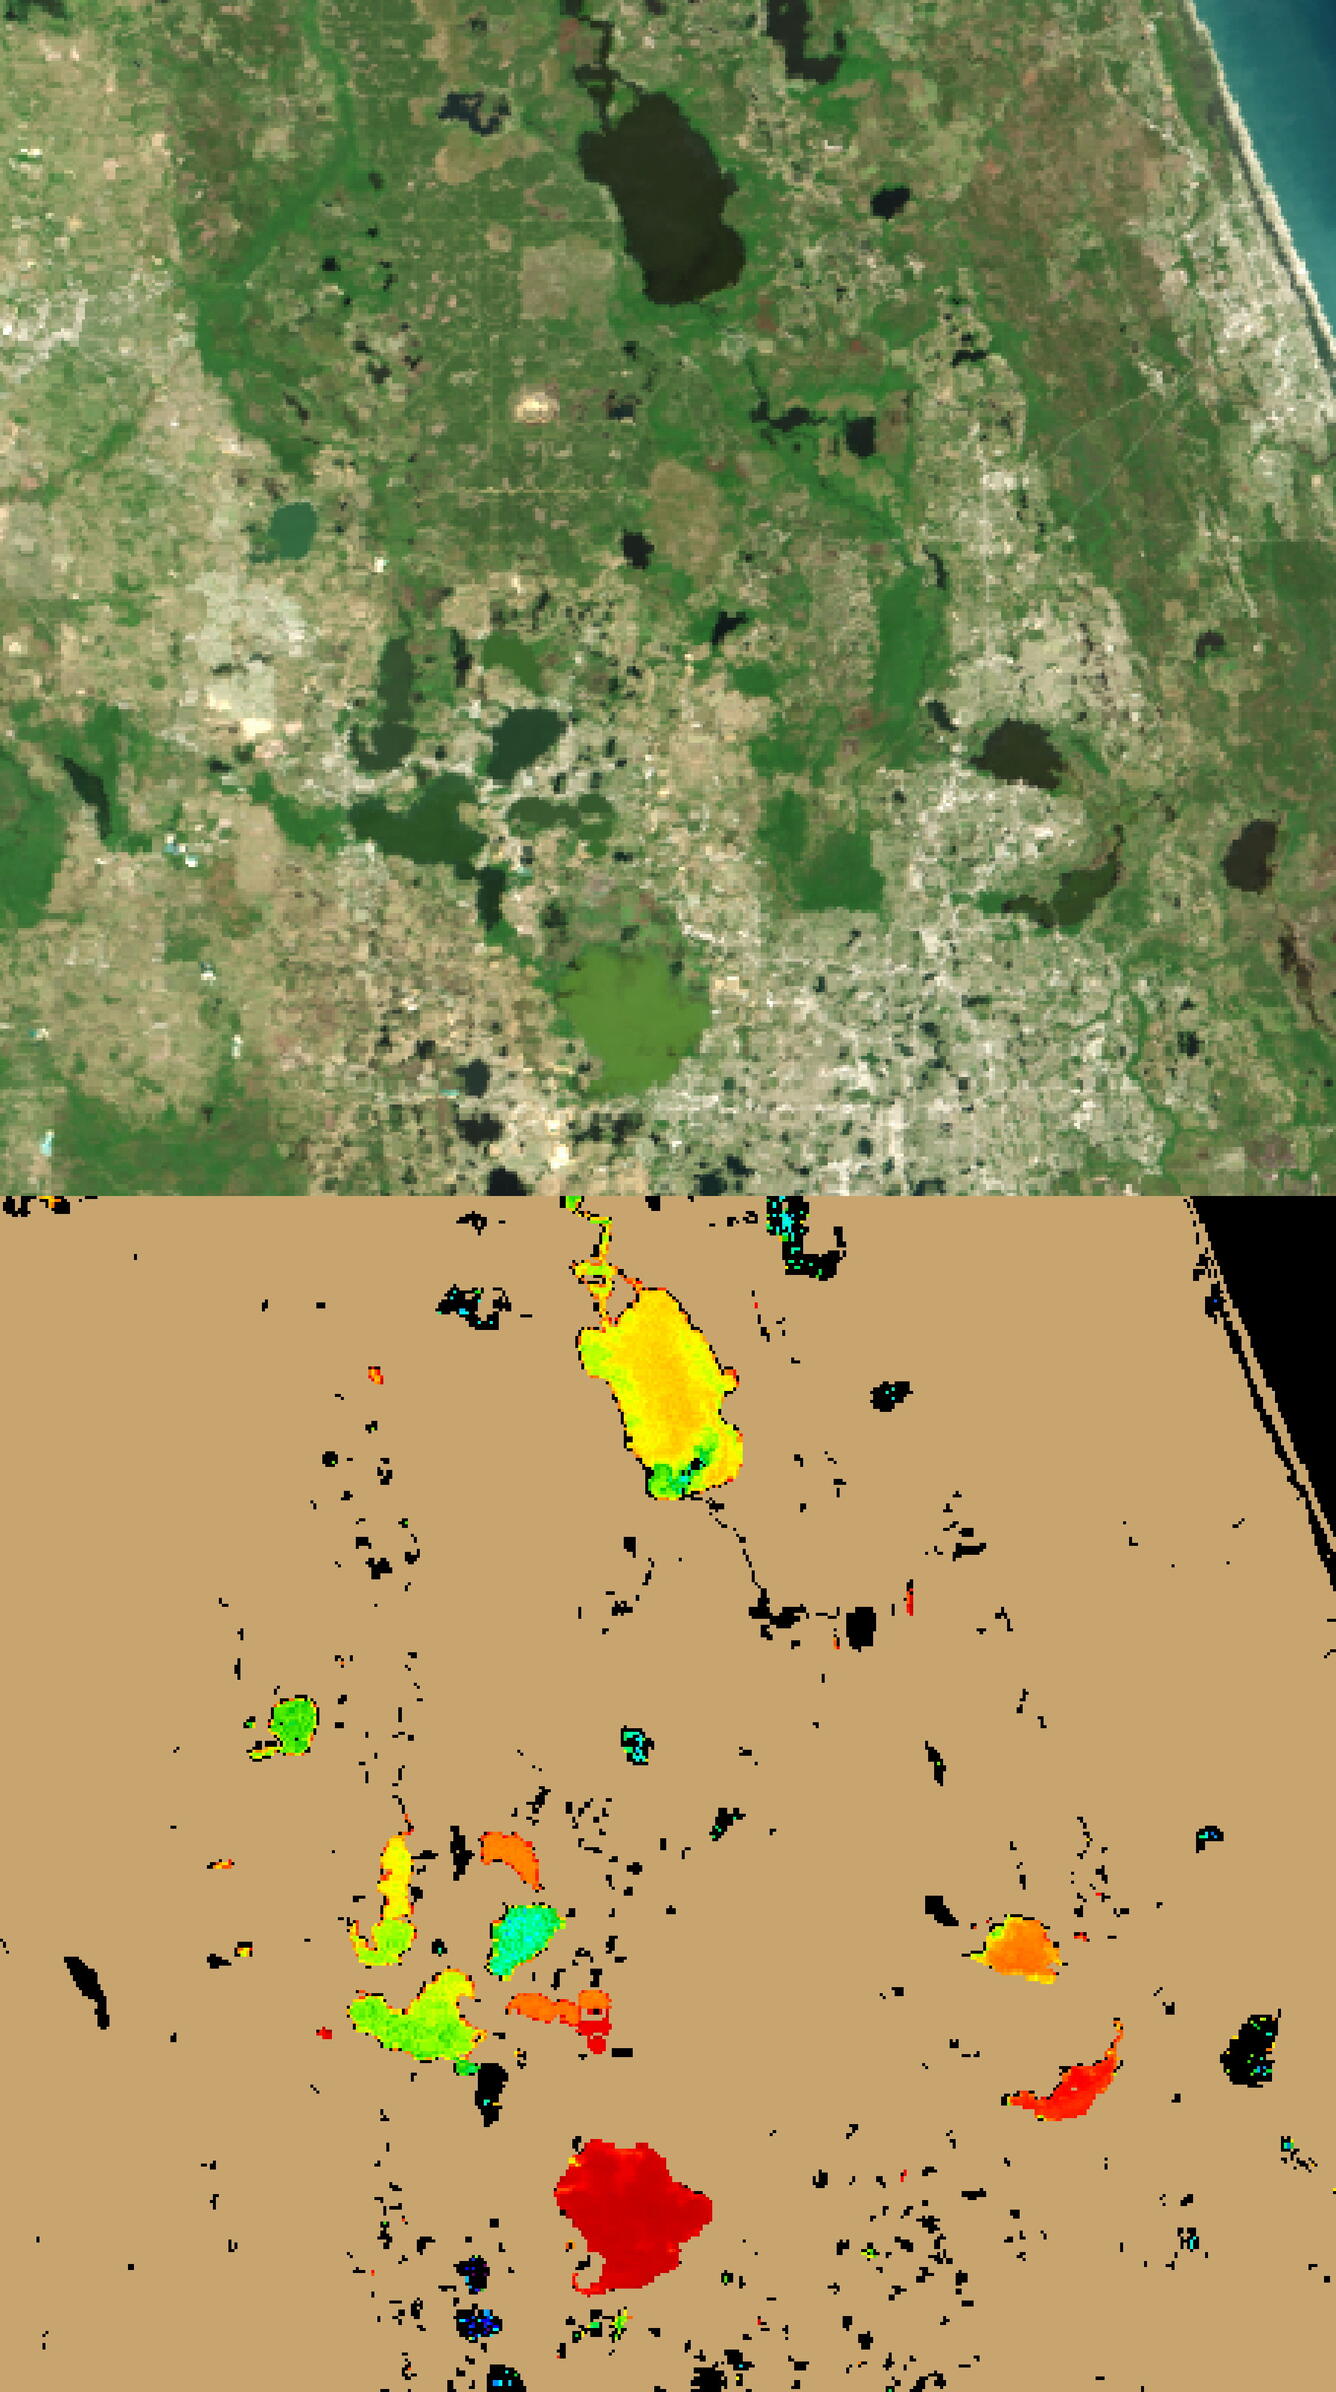 Satellite Image Showing Estimated Cyanobacteria Concentrations